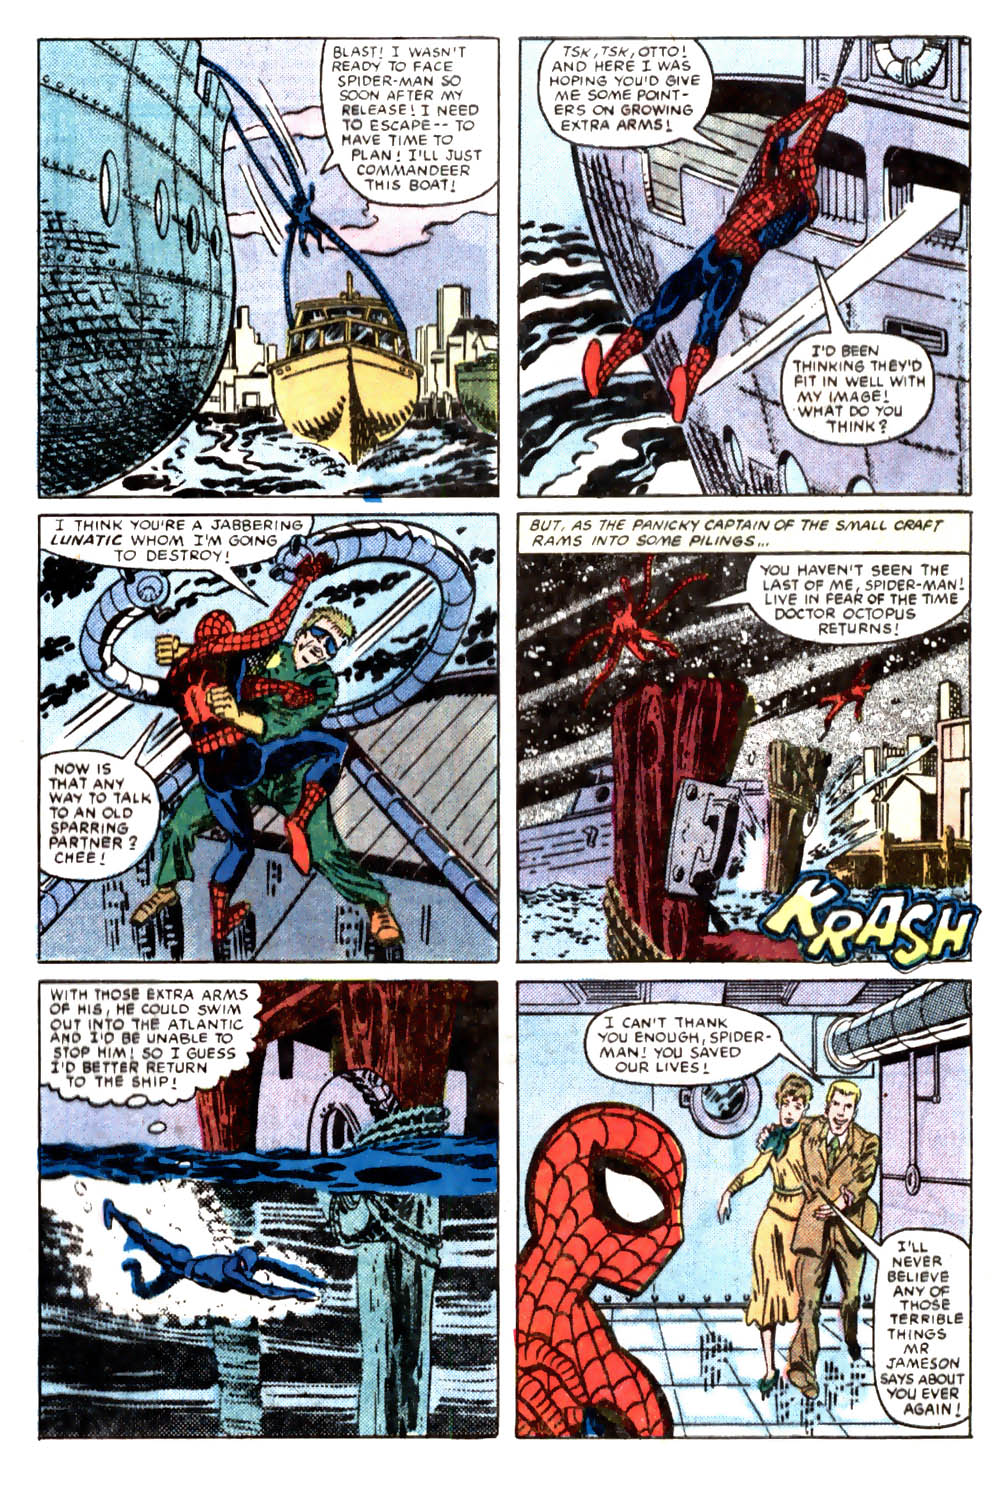 What If? (1977) issue 46 - Spiderman's uncle ben had lived - Page 28